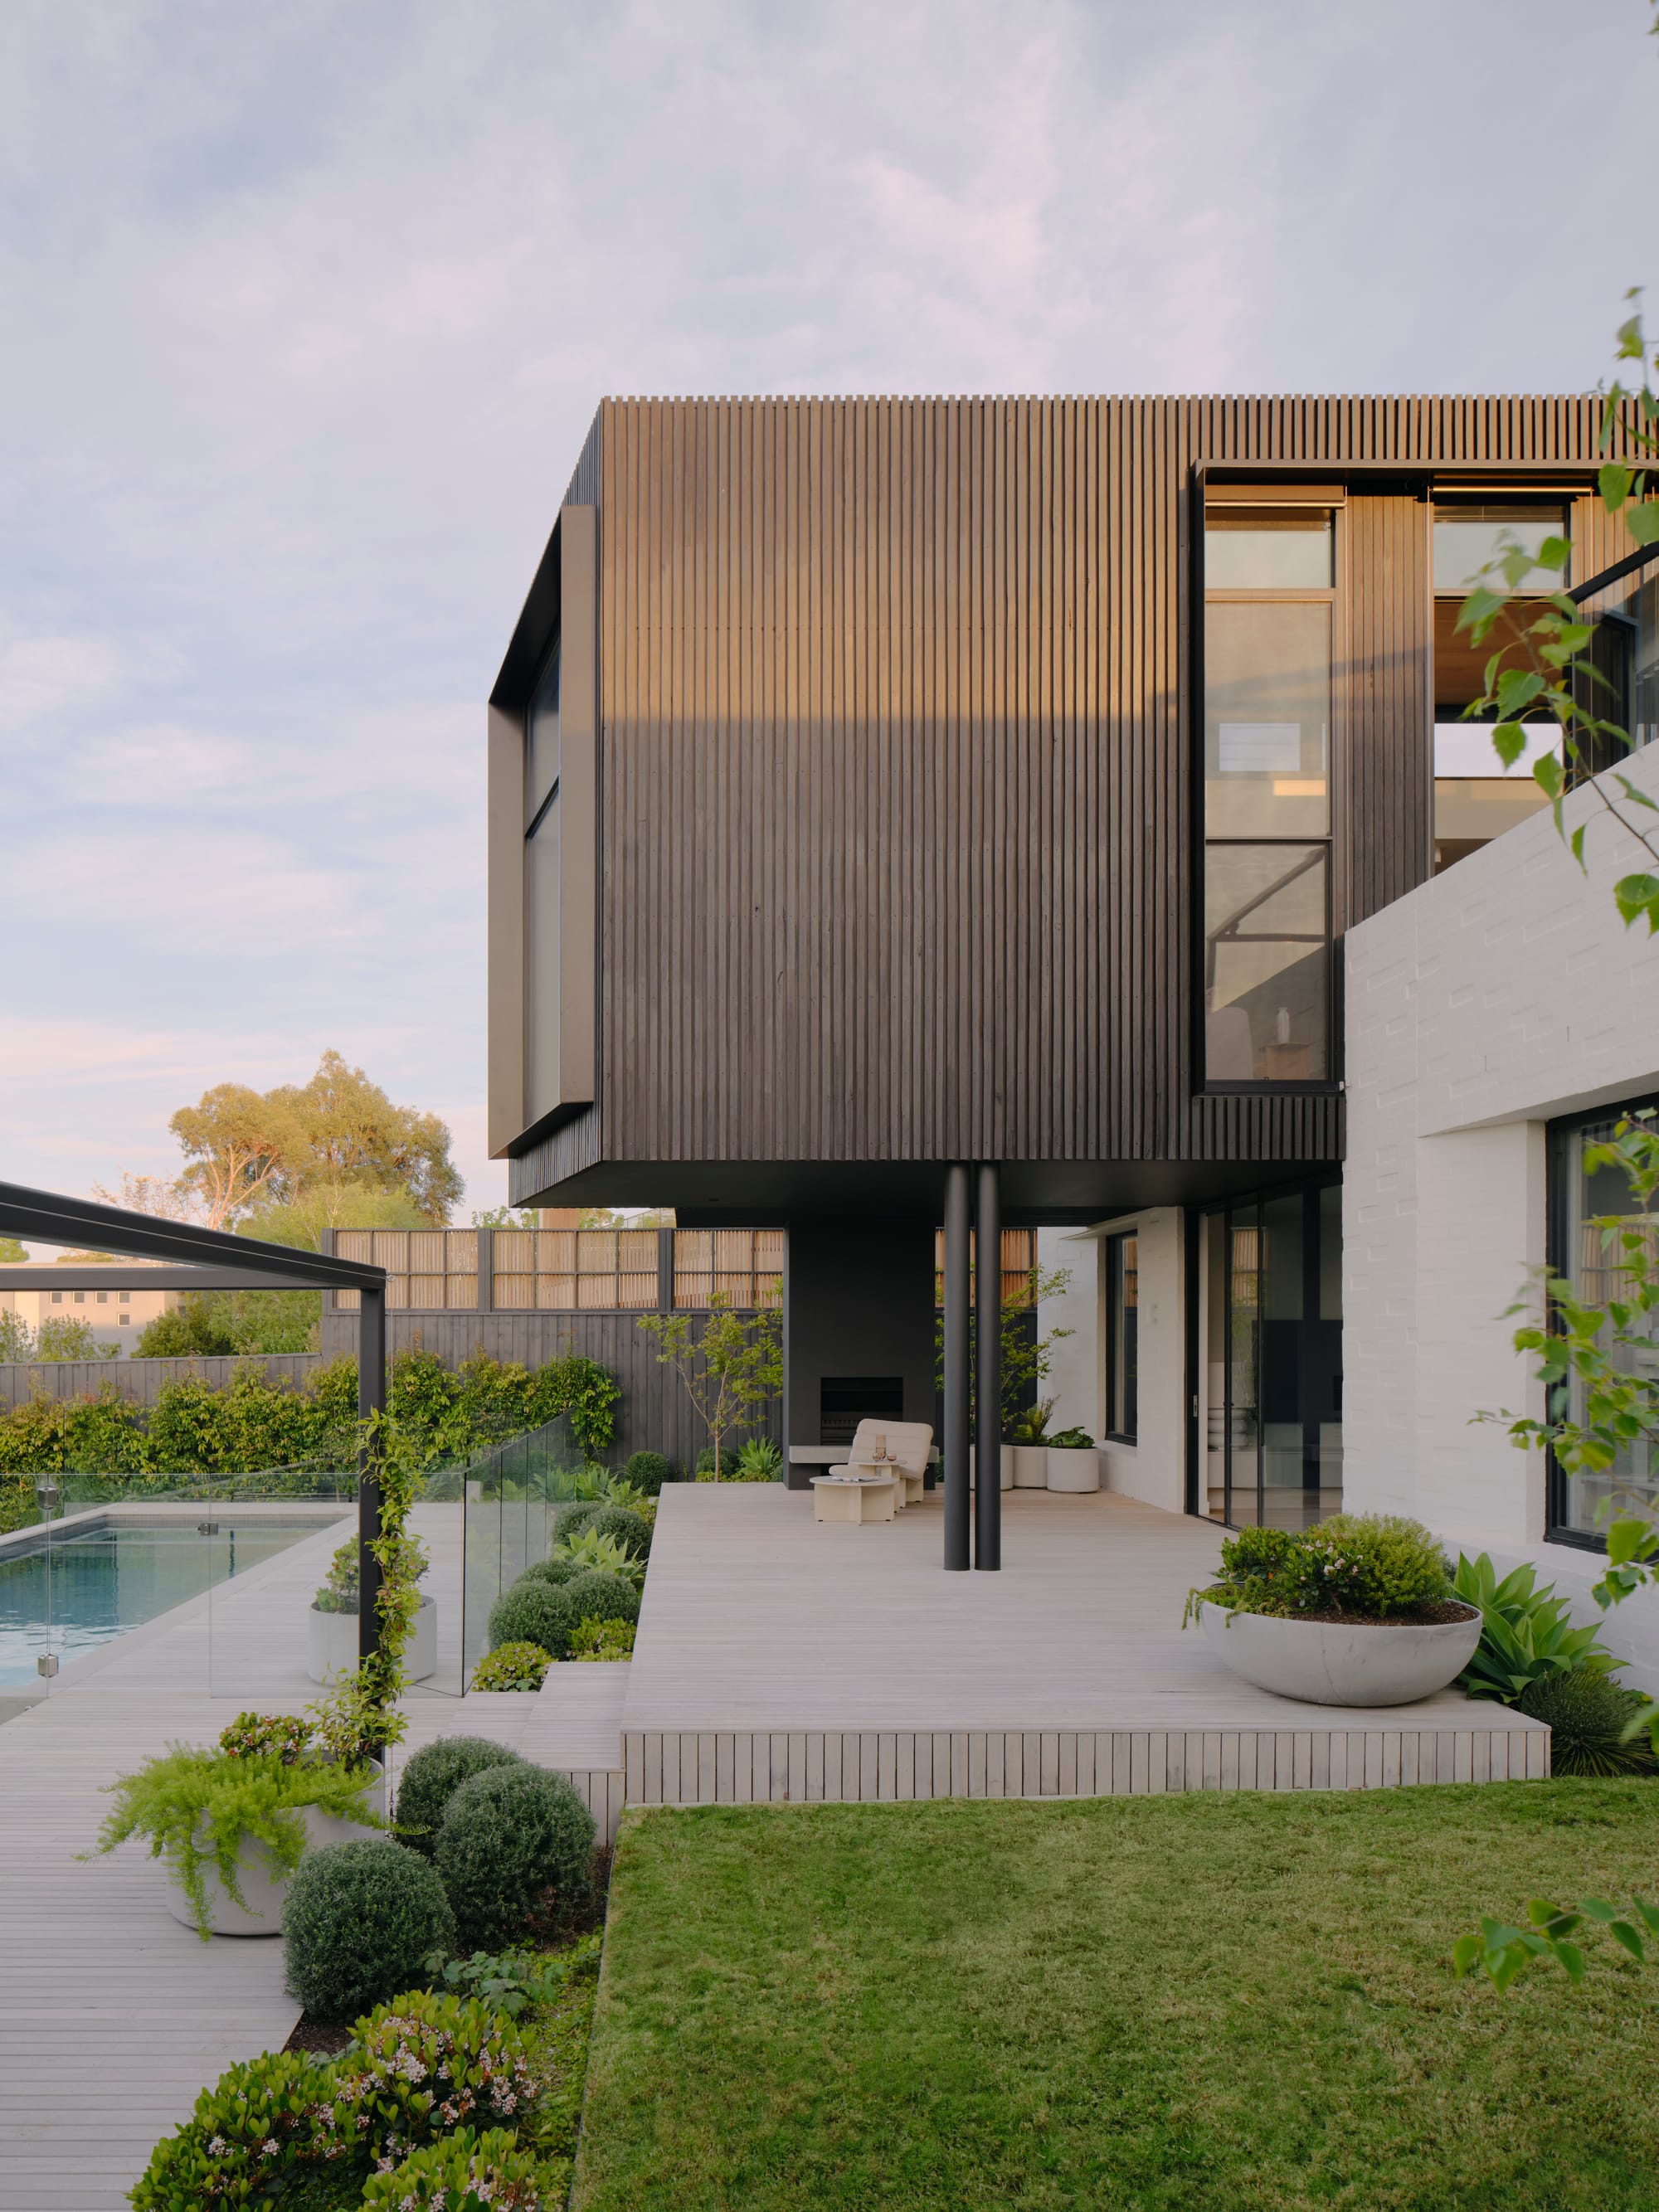 Courtside House by Tom Robertson Architects showing the exterior and timber deck outdoor space